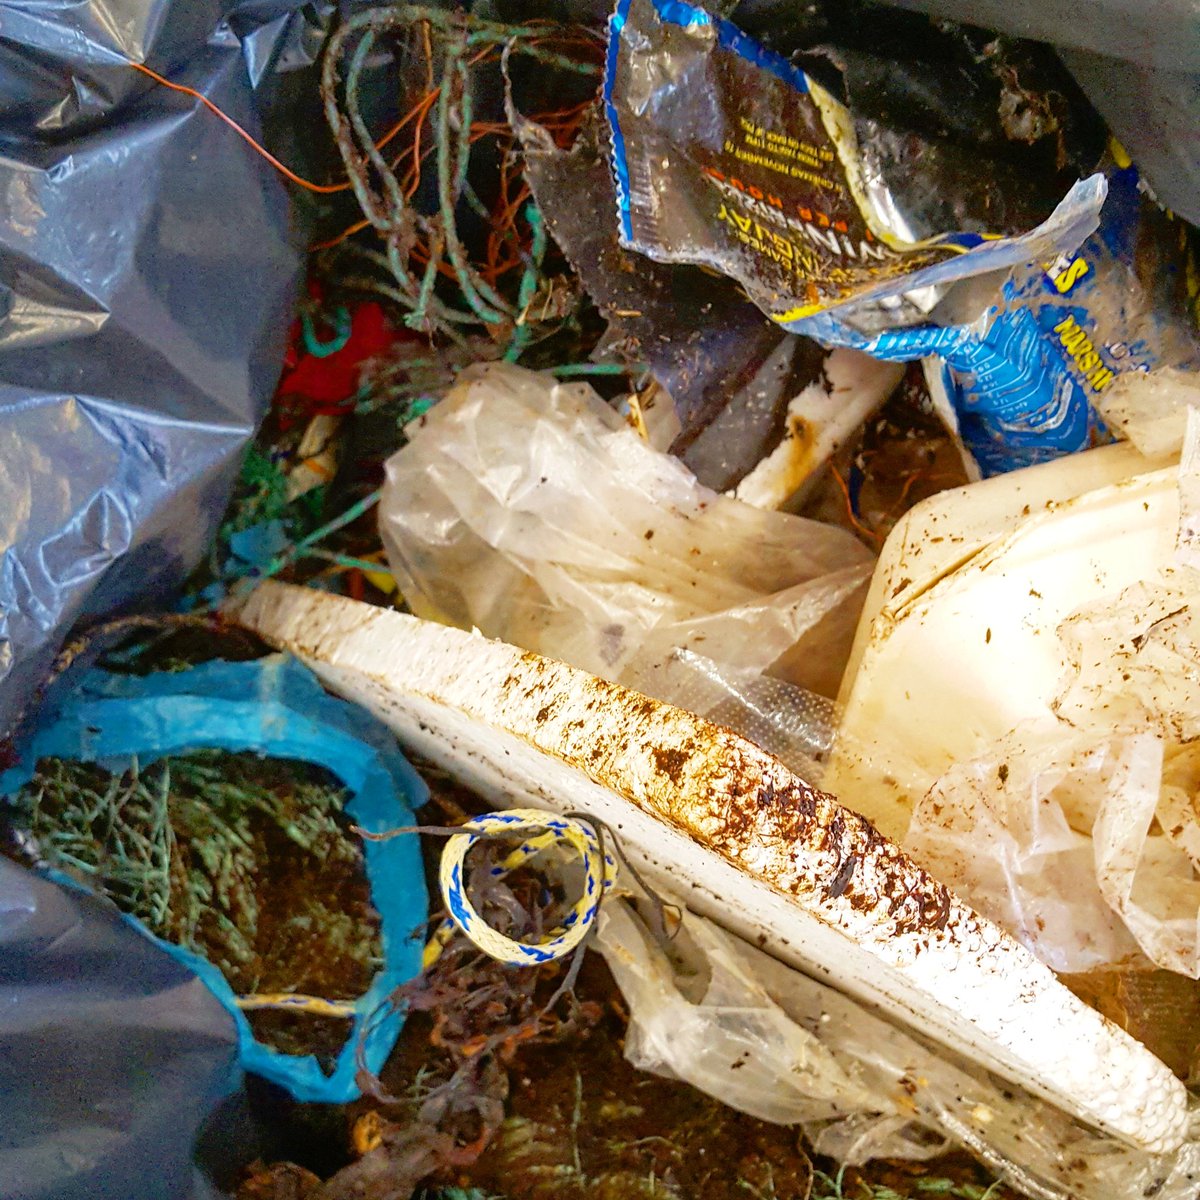 Time for the March mini beach clean at the Marine Station. In 20 minutes we collected enough old rope, netting, sweet wrappers and plastic to fill a 60litre bin. #marineplastics #plasticfree @PlymUni @MarineSciSoc @SciEngPlymUni @MarineSciPlym